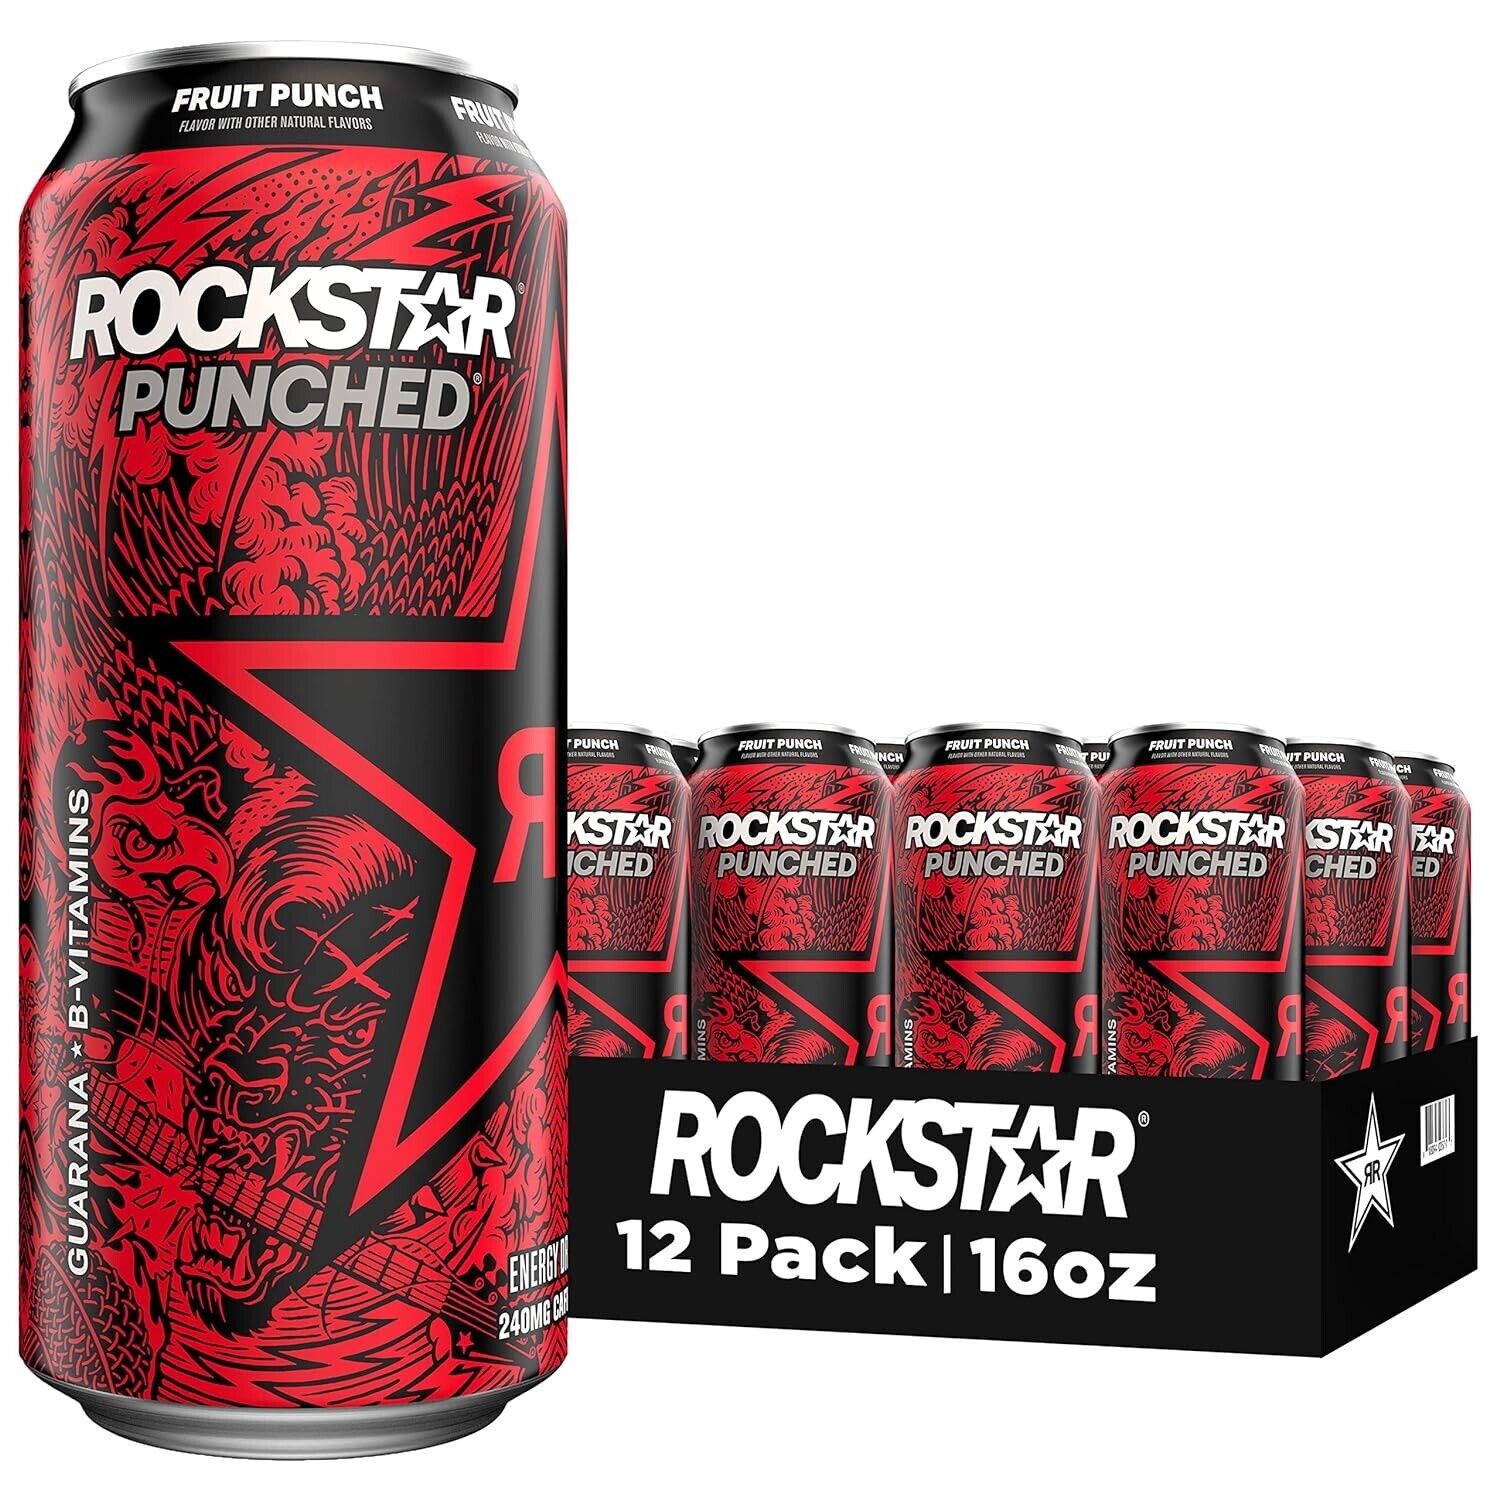 Rockstar Punched Energy Drink, Fruit Punch, 16oz Cans | 12 Pack